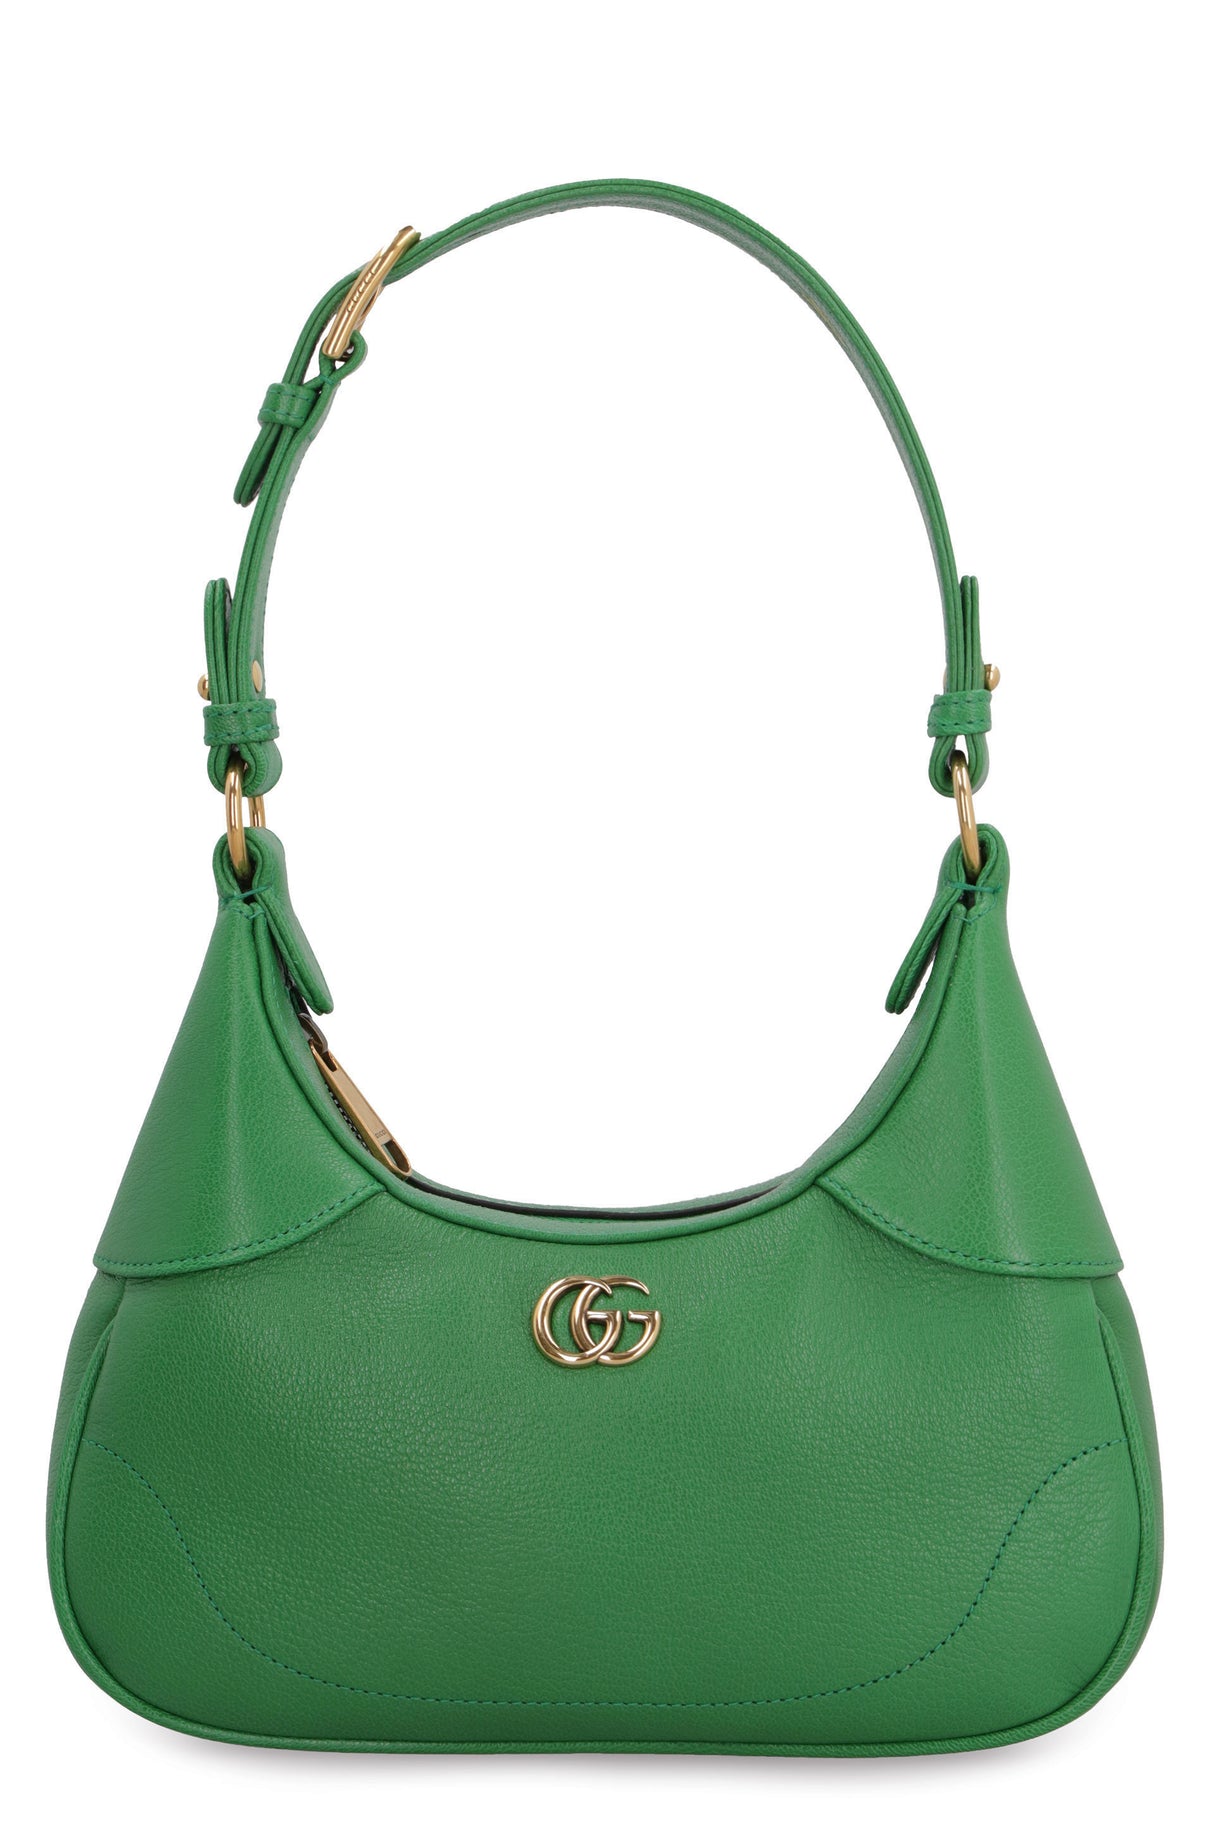 GUCCI Aphrodite Mini Green Leather Shoulder Bag with Gold-Tone Hardware and Suede Lining (25cm x 13cm x 6cm)